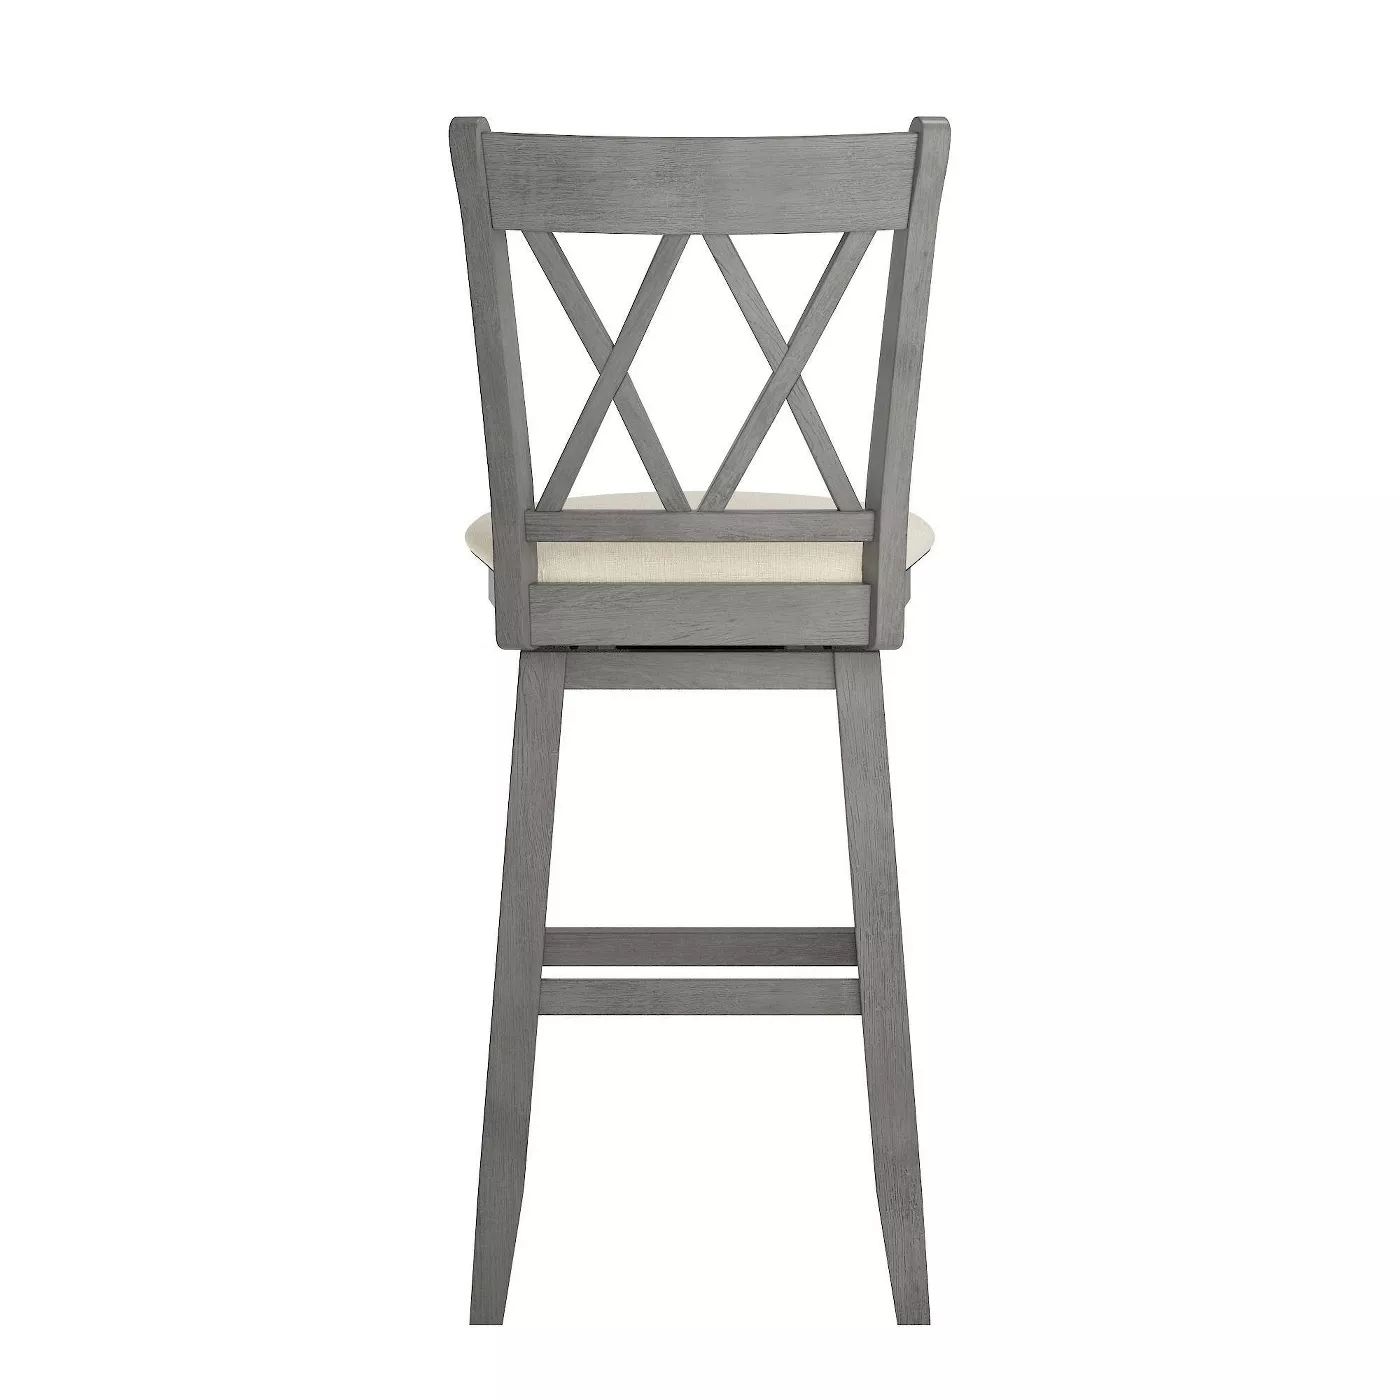 29" South Hill Double X Back Wood Swivel Height Barstool - Inspire Q | Target